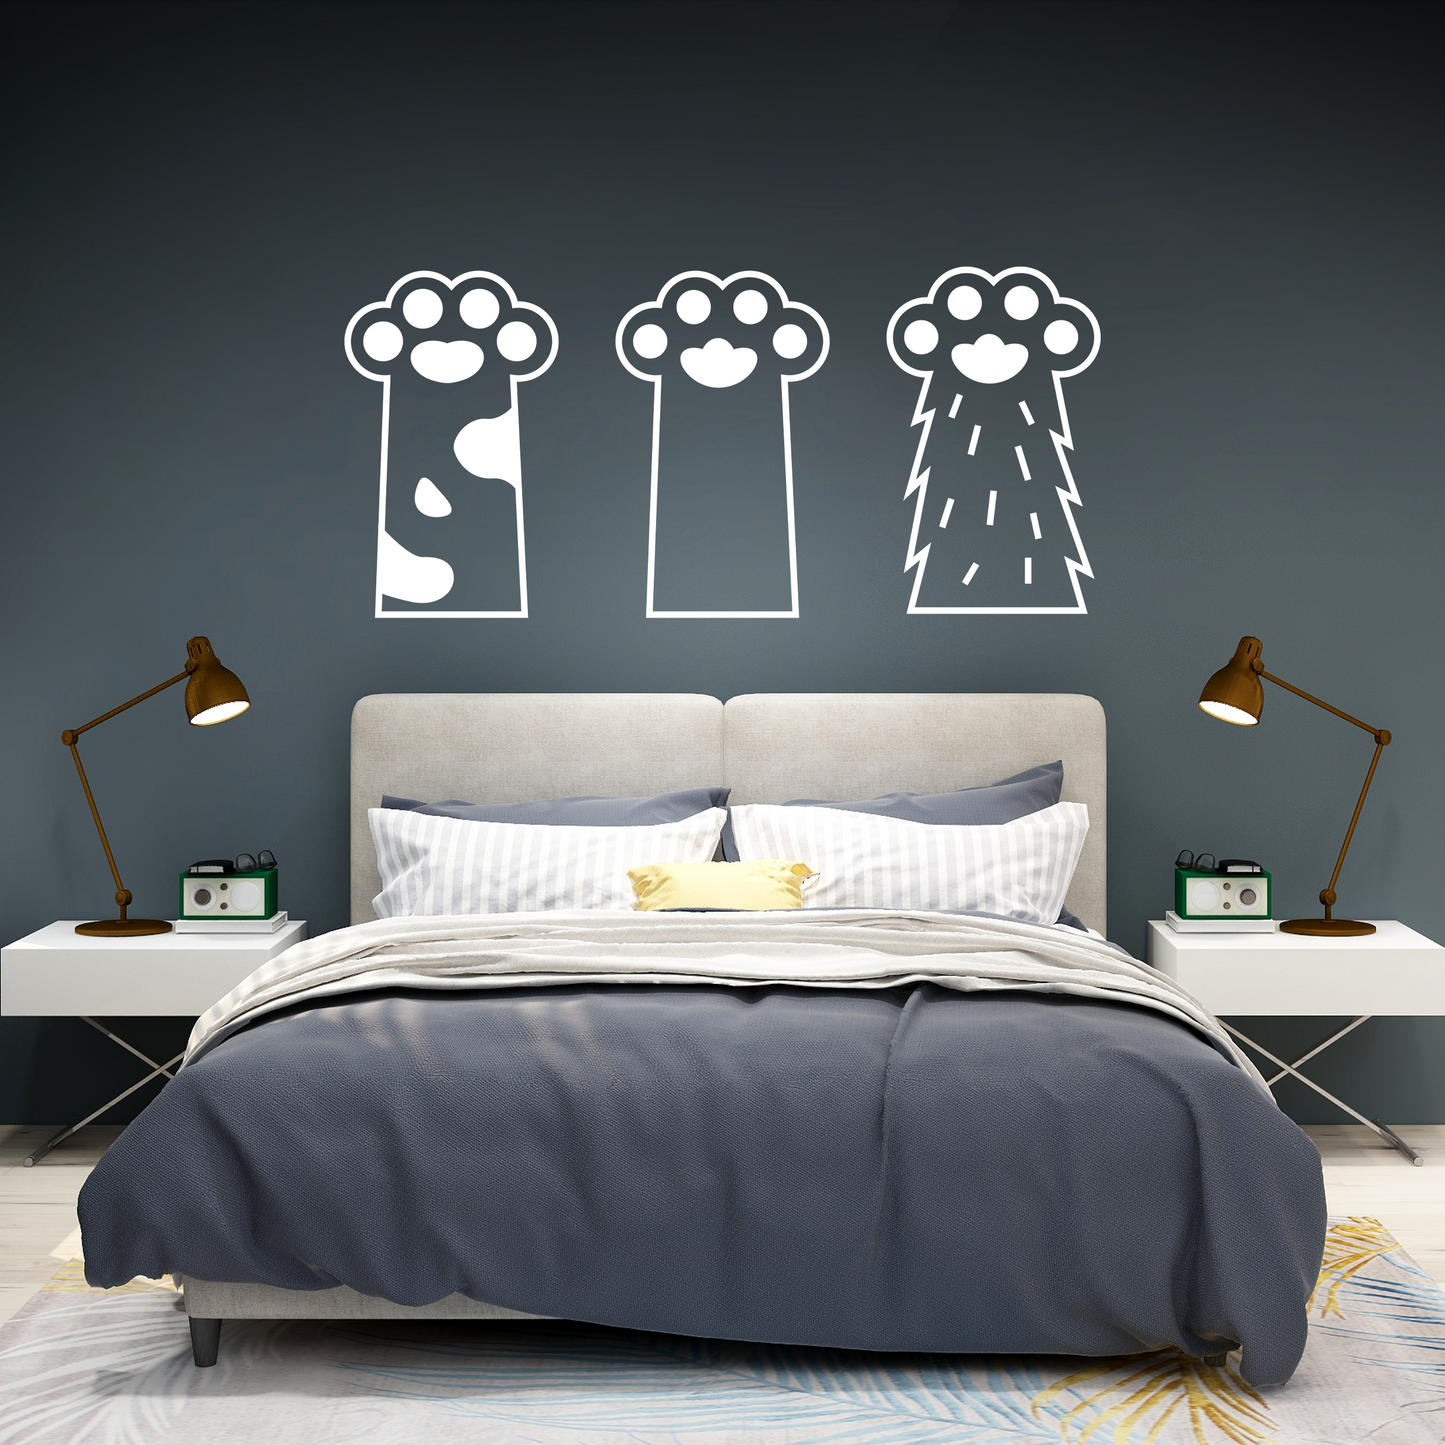 Triple Paws Wall Decal